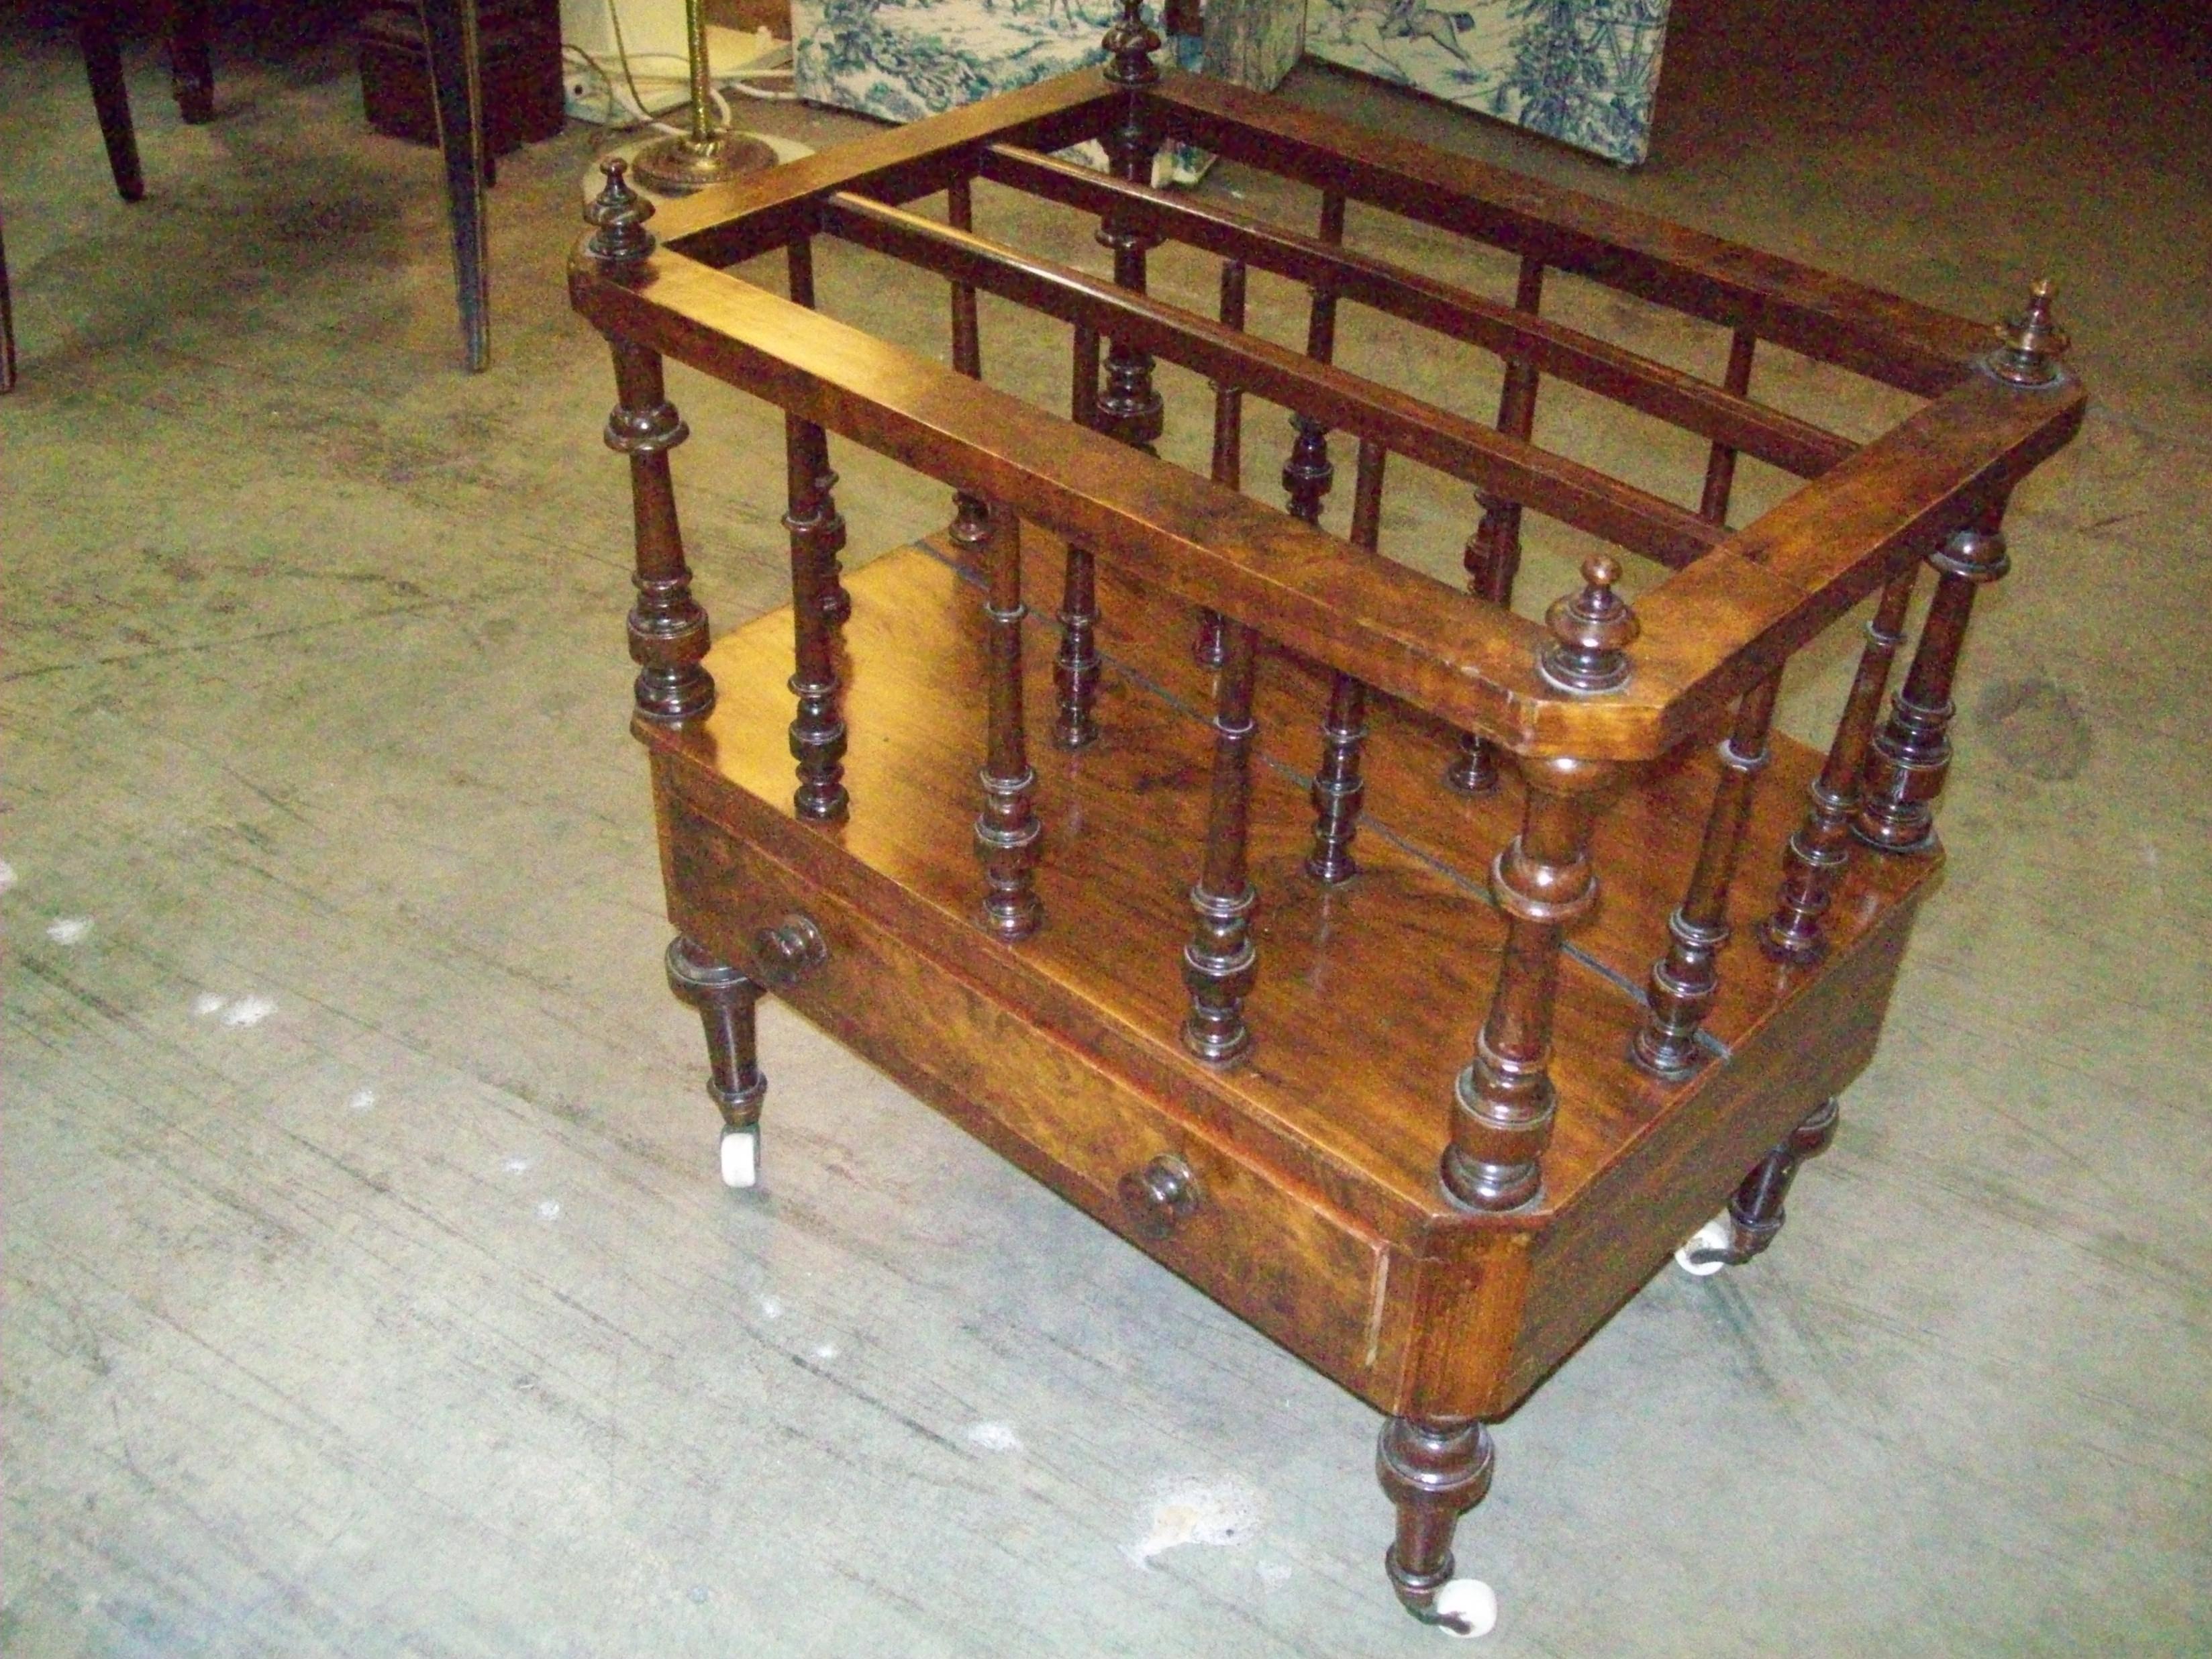 English Regency period burl walnut canterbury with sophisticated turnings and original casters.